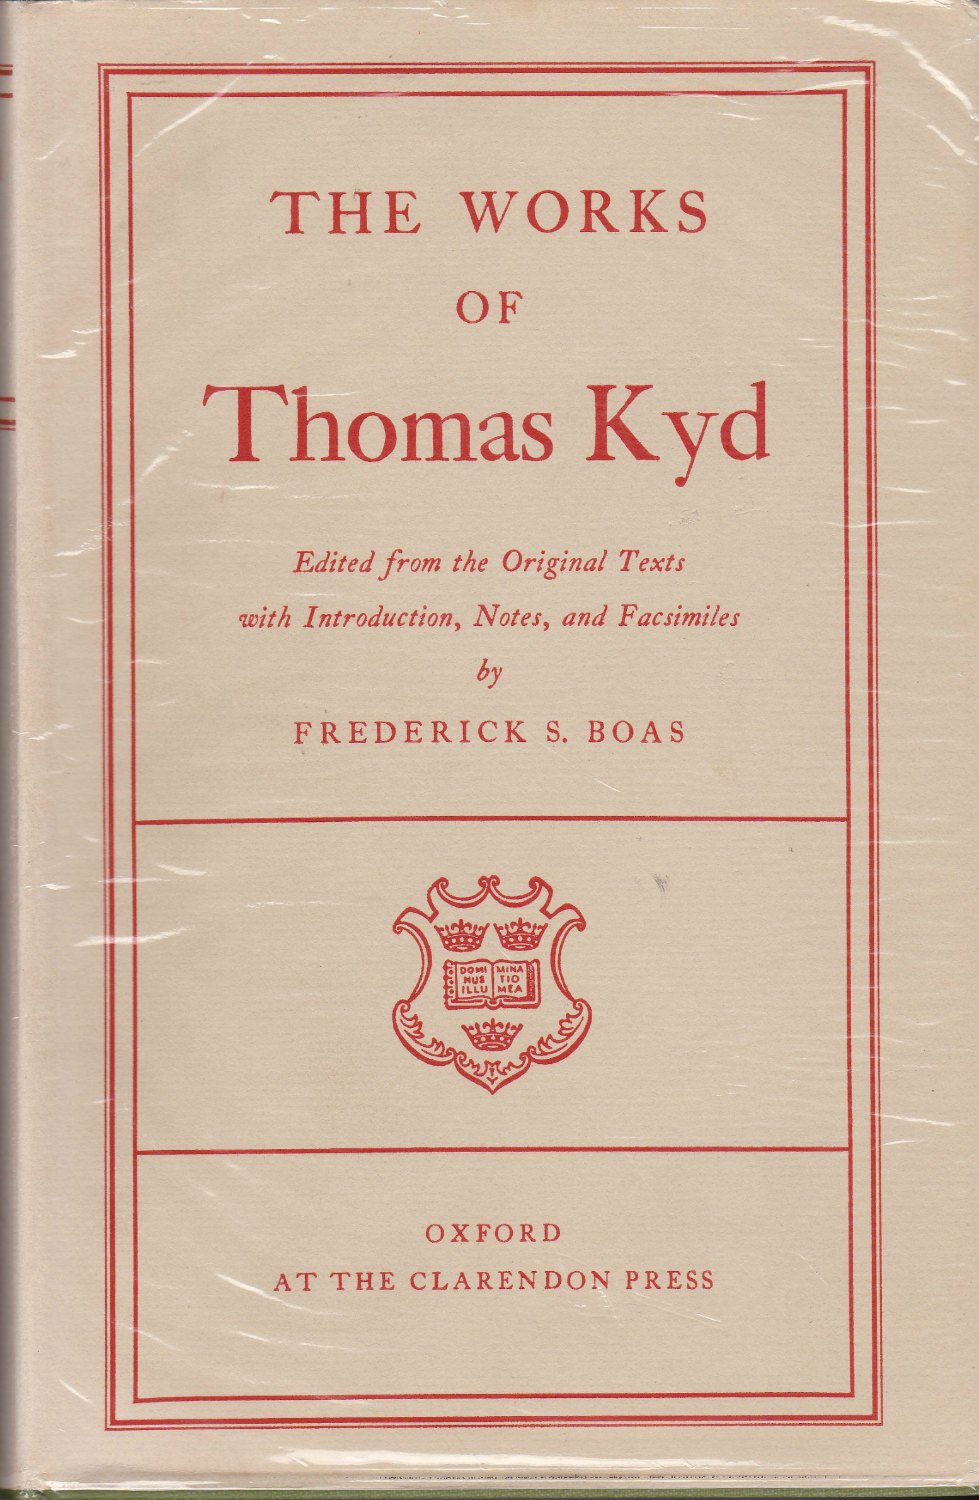 The works of Thomas Kyd.